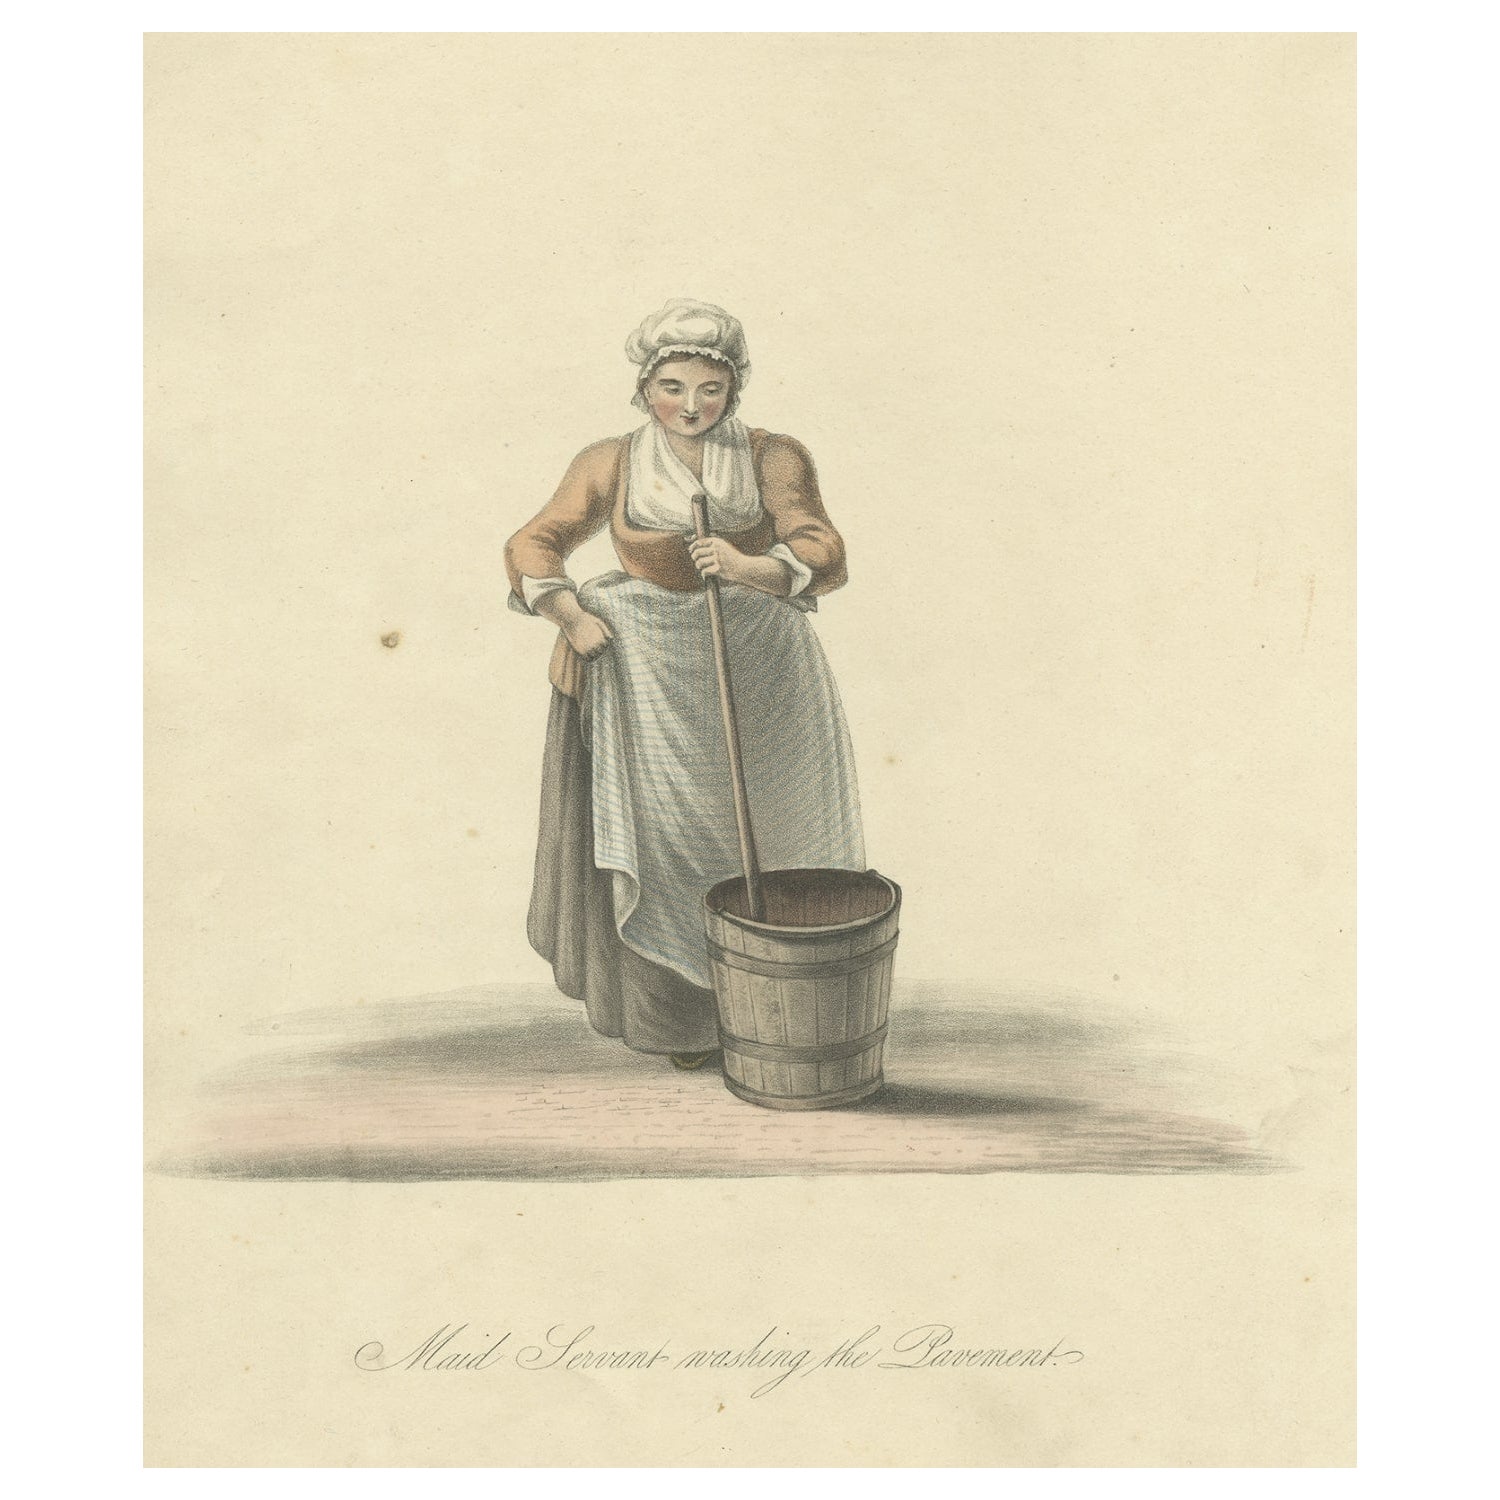 Old Hand-Colored Print of a Maid Servant in Holland, Washing the Pavement, 1817